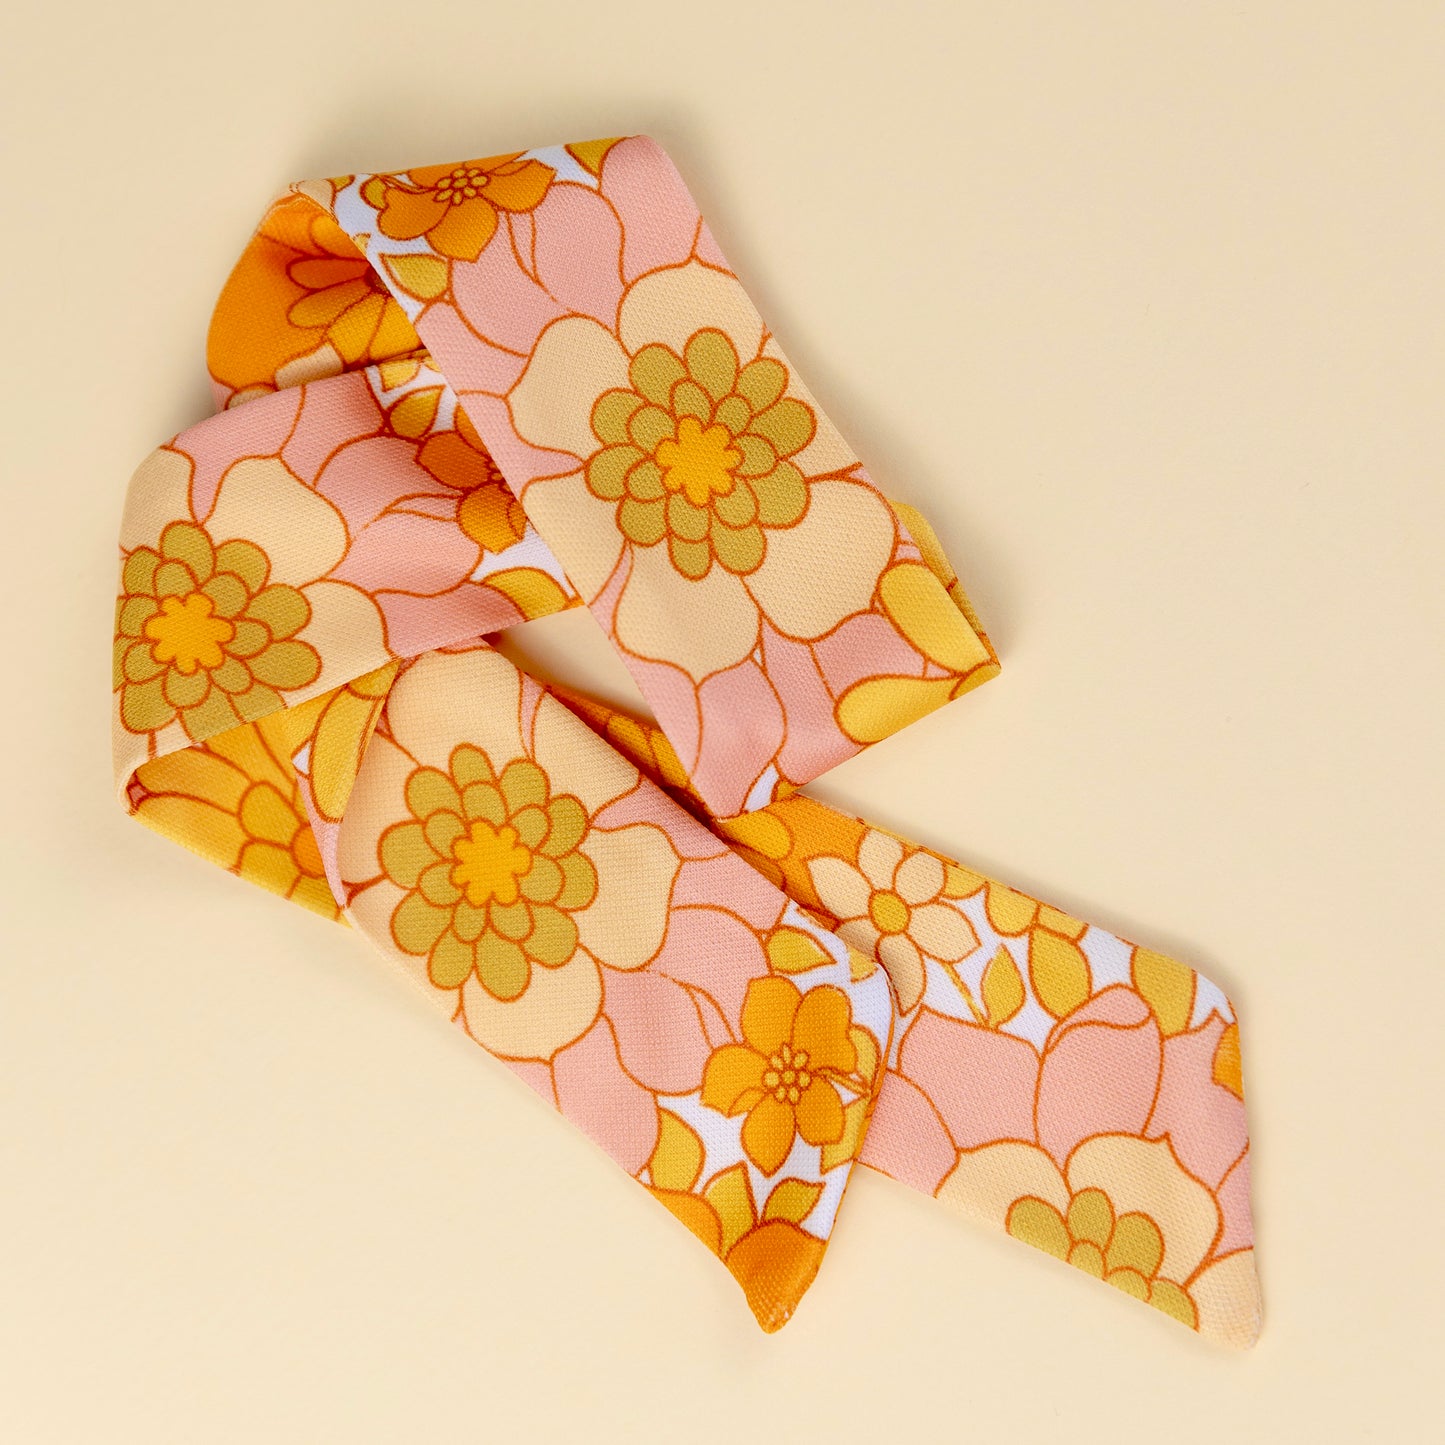 THE HAIR SCARF in Grandma’s Floral/ Statement Hair Accessory